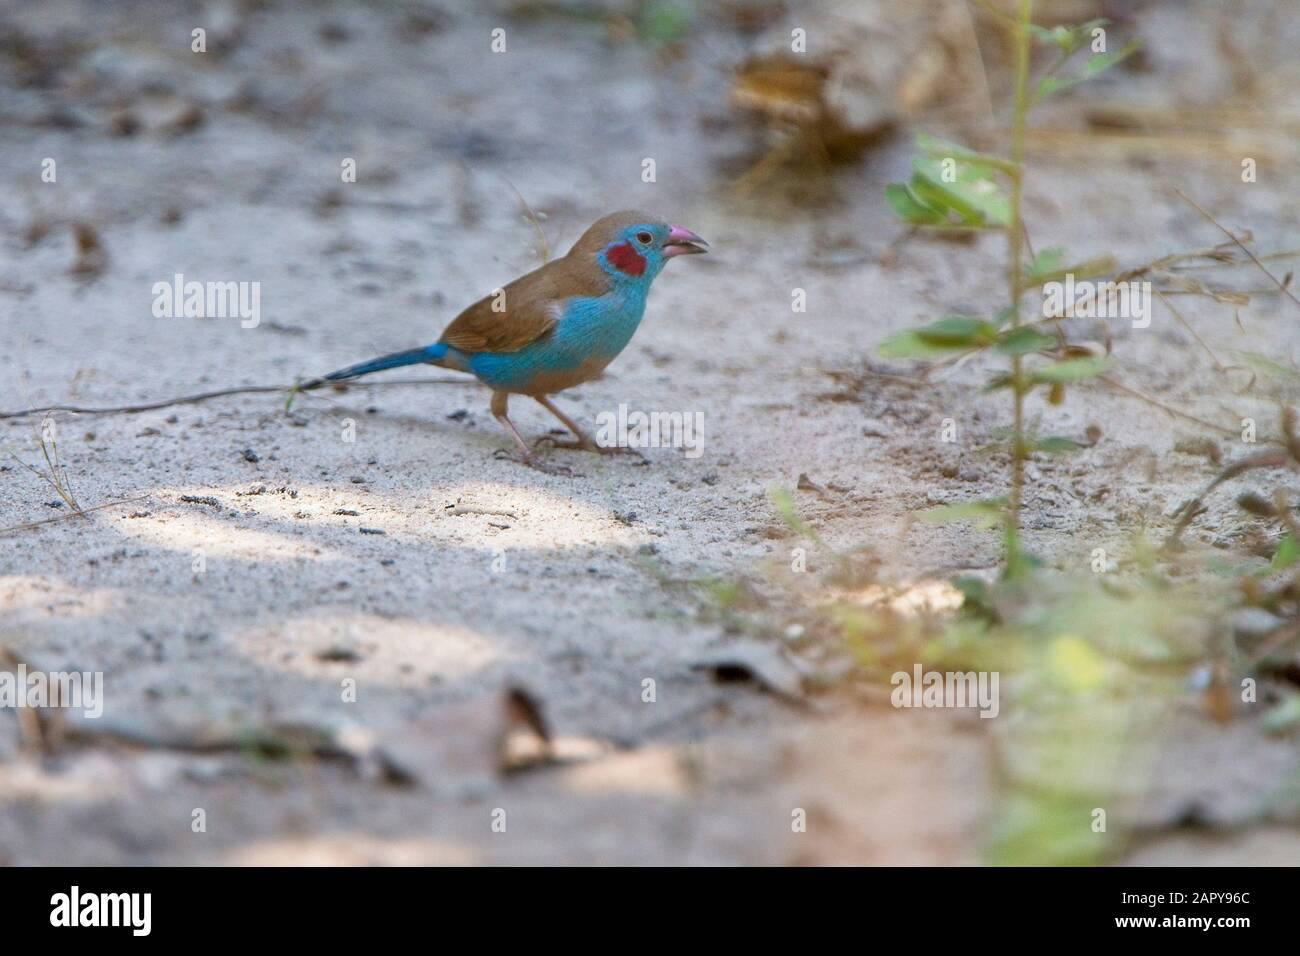 Red-cheeked Cordon Bleu (Uraeginthus bengalus), male eating seed on the ground, Gambia. Stock Photo